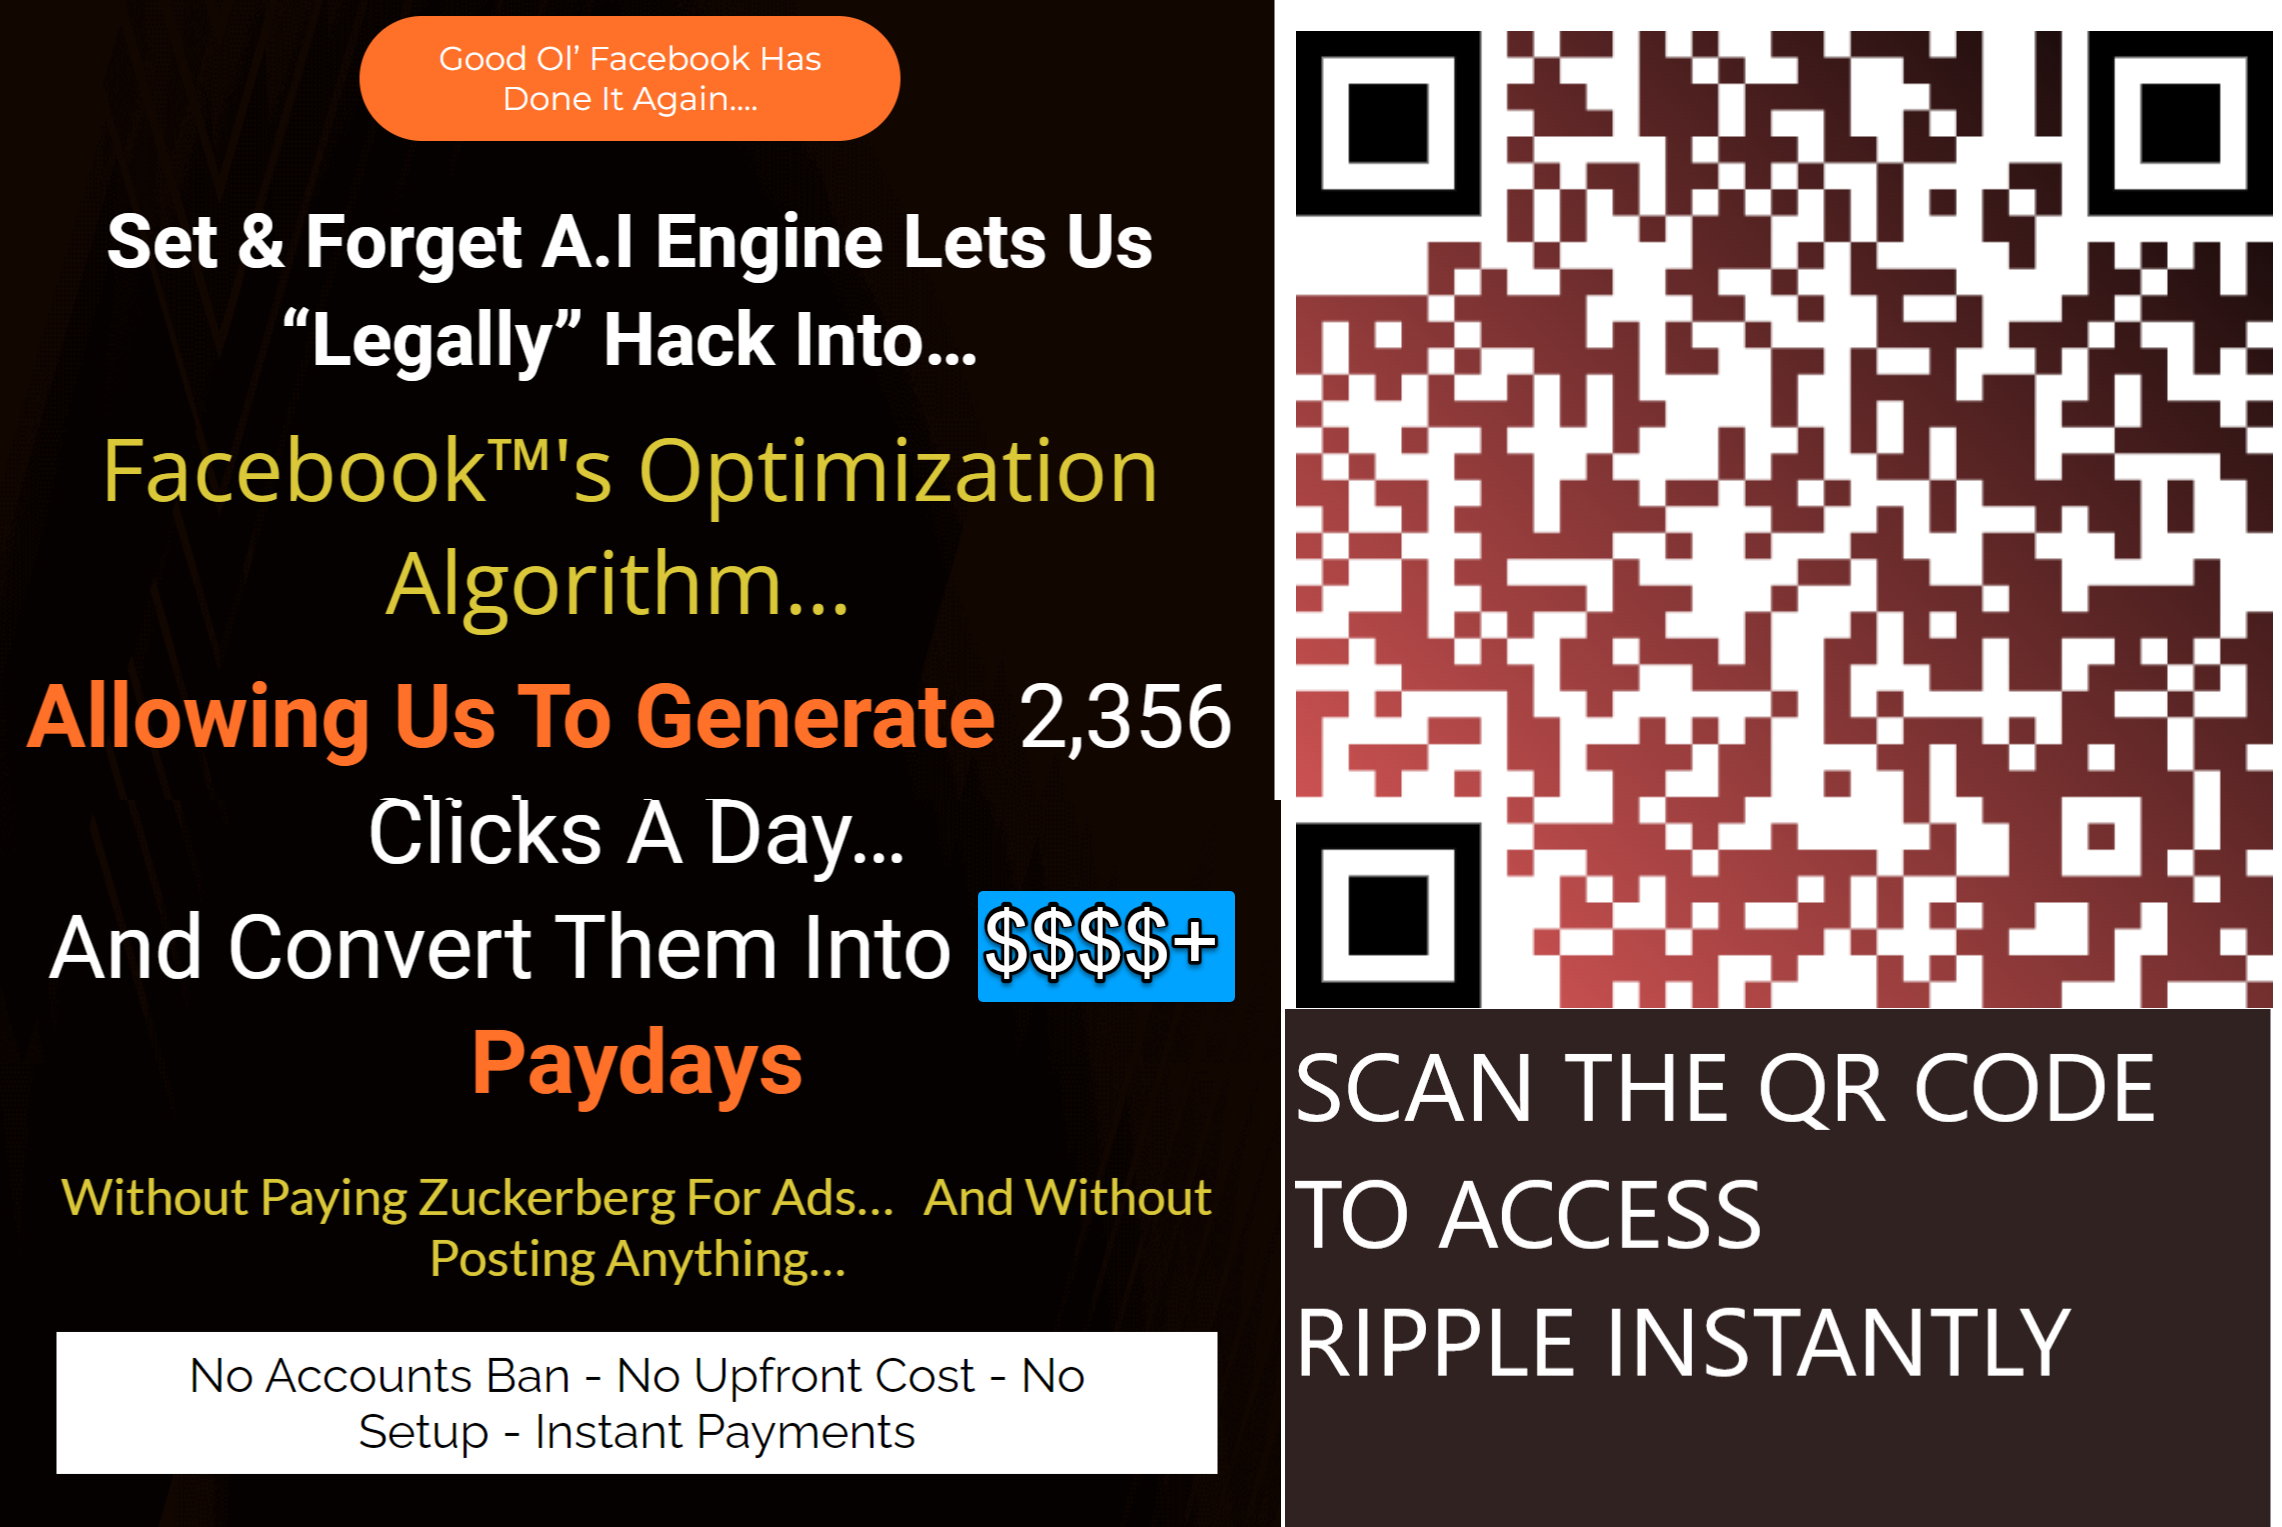 ripple QR CODE Ripple Review - The World's First "Set 'N Forget" AI App Finally Crack the Code to Free Traffic From Facebook. See Ripple Demo Video